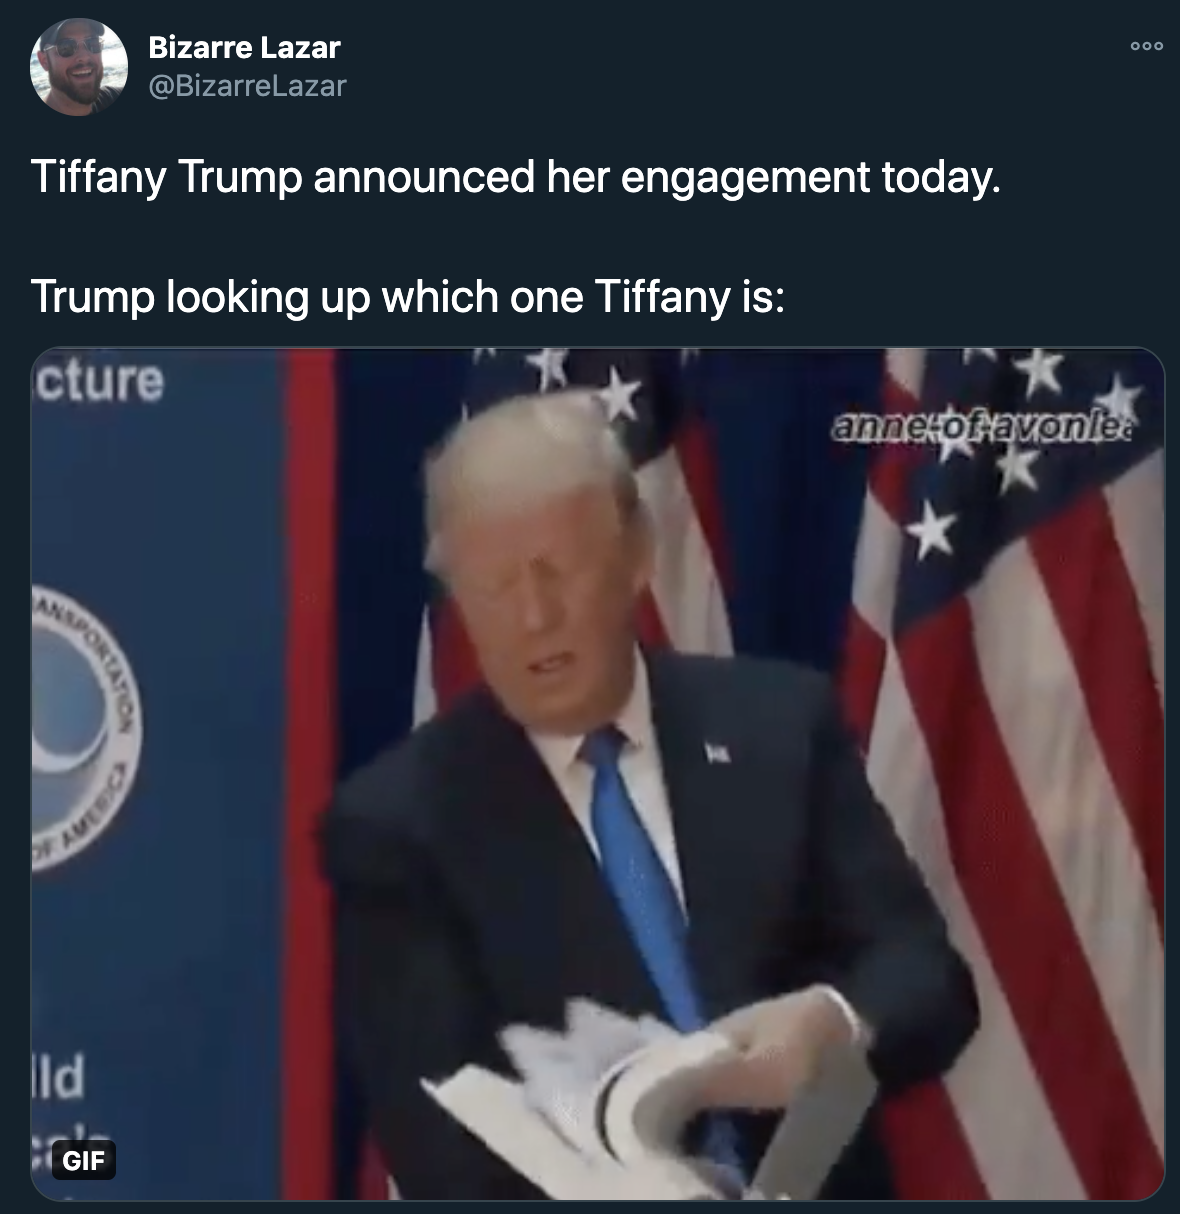 tiffany trump engagement - Tiffany Trump announced her engagement today. Trump looking up which one Tiffany